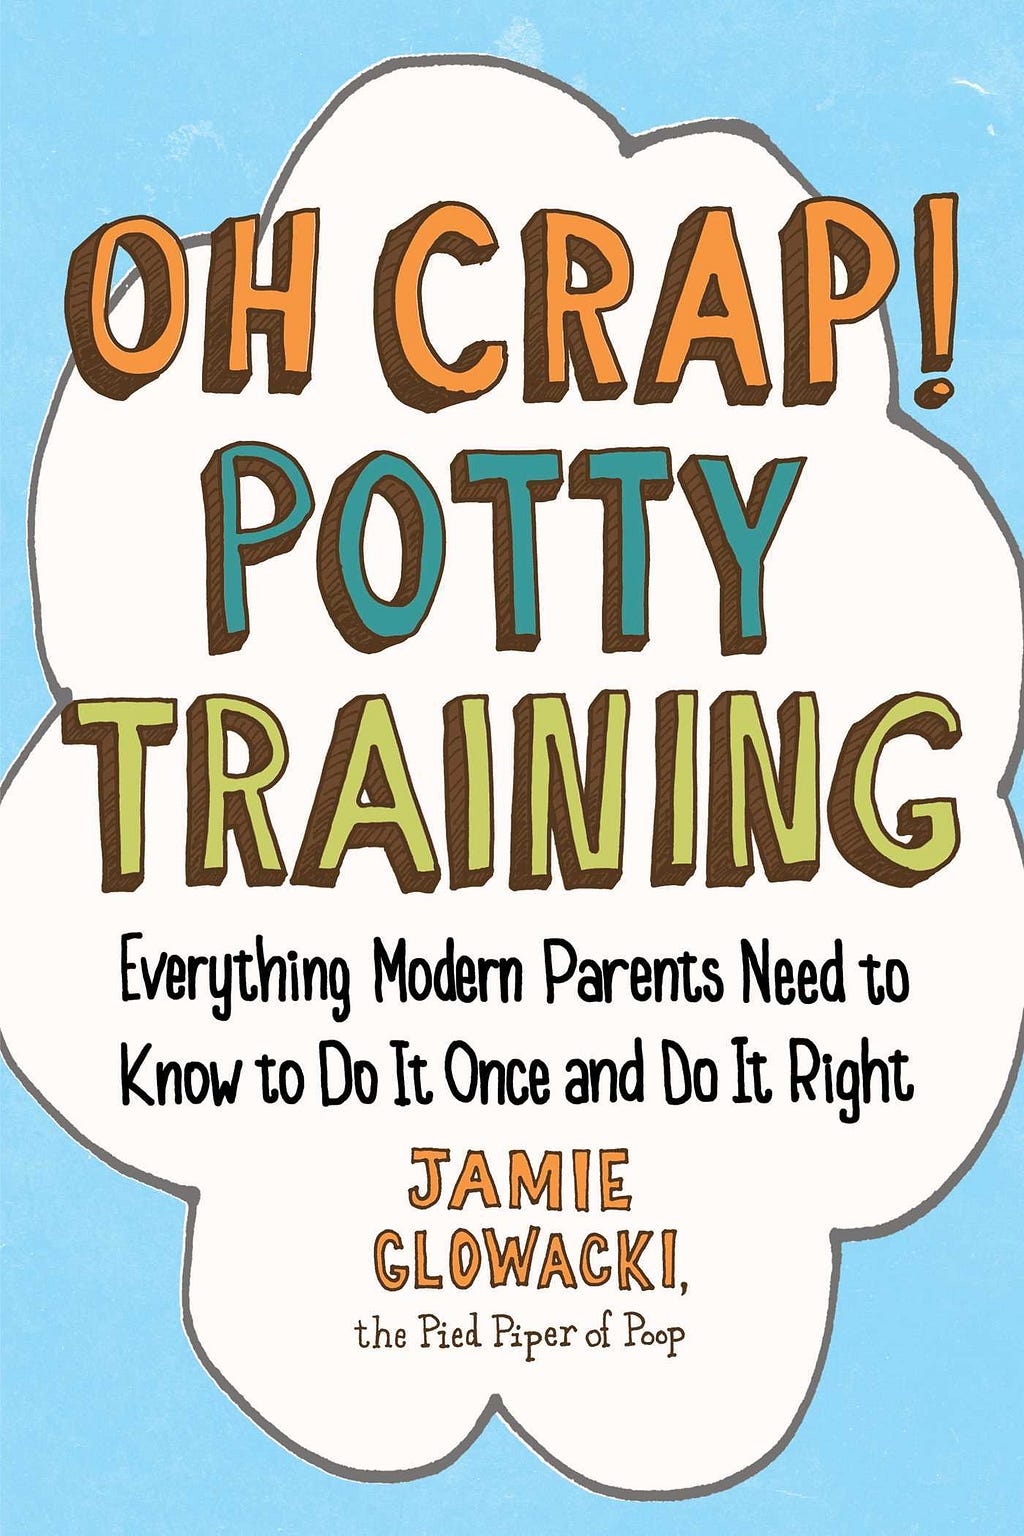 Oh Crap! Potty Training: Everything Modern Parents Need to Know to Do It Once and Do It Right PDF